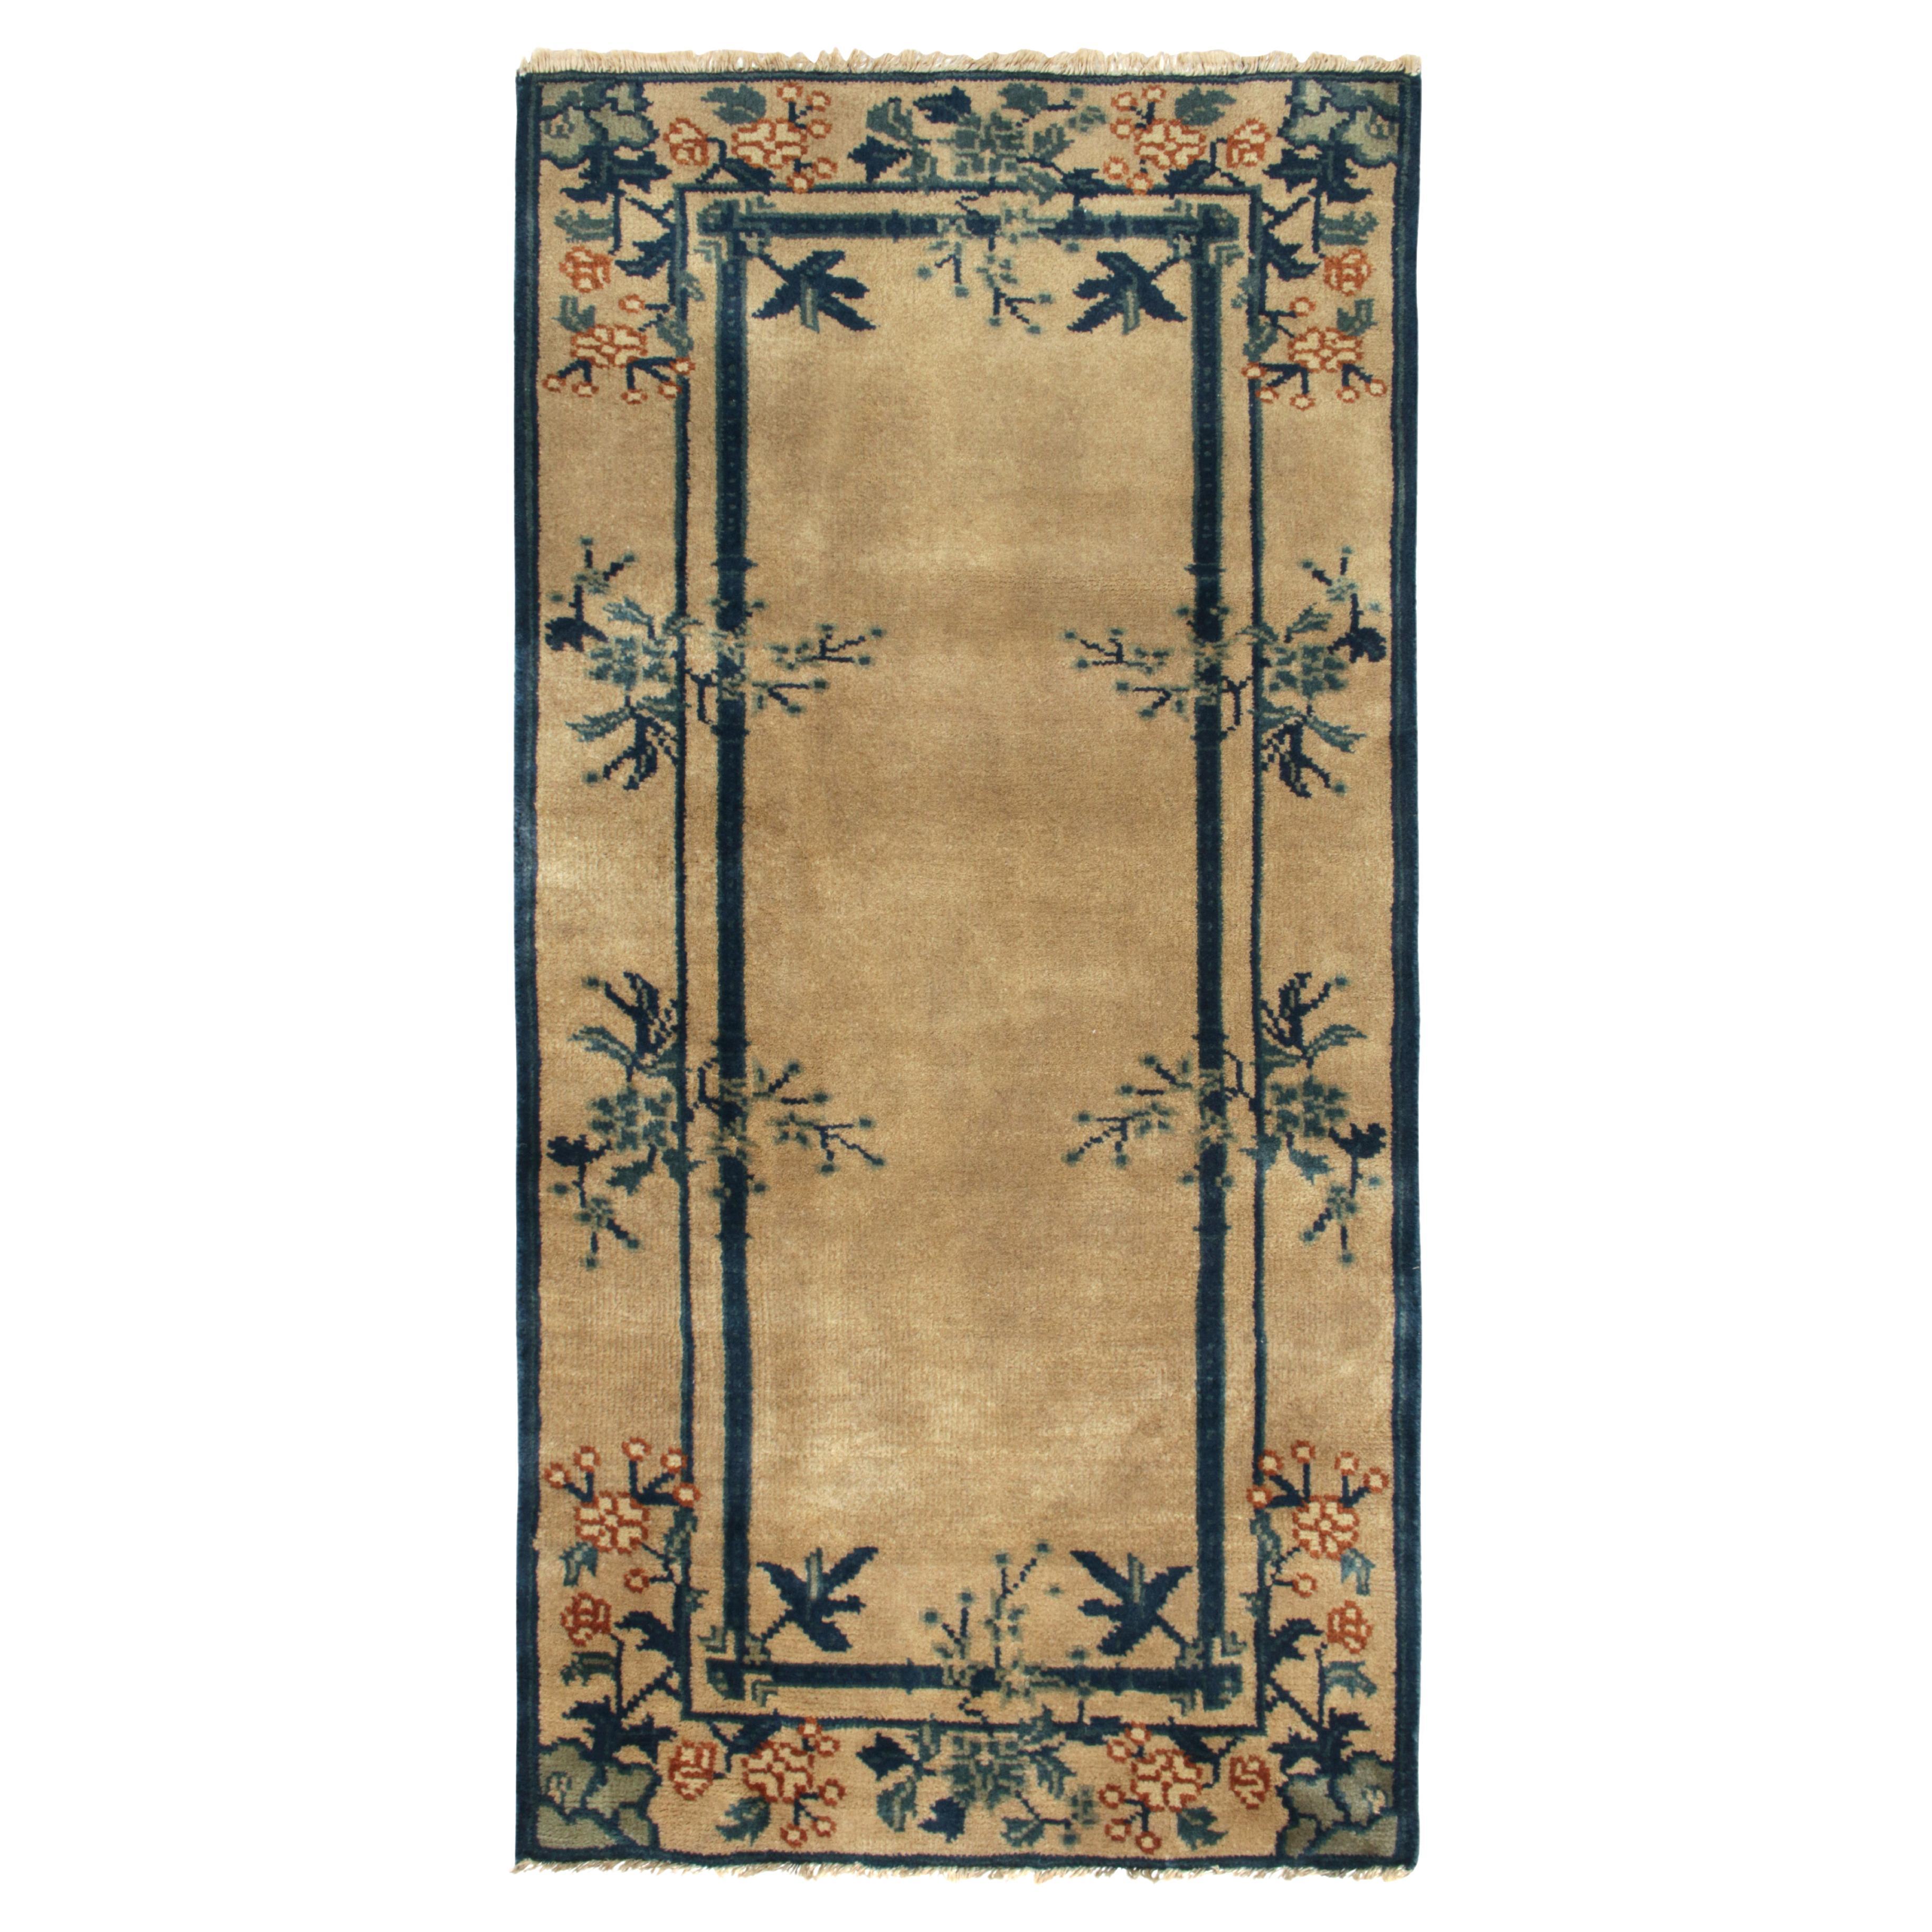 Vintage Chinese Deco Style Rug in Beige Blue Green Floral Pattern by Rug & Kilim For Sale